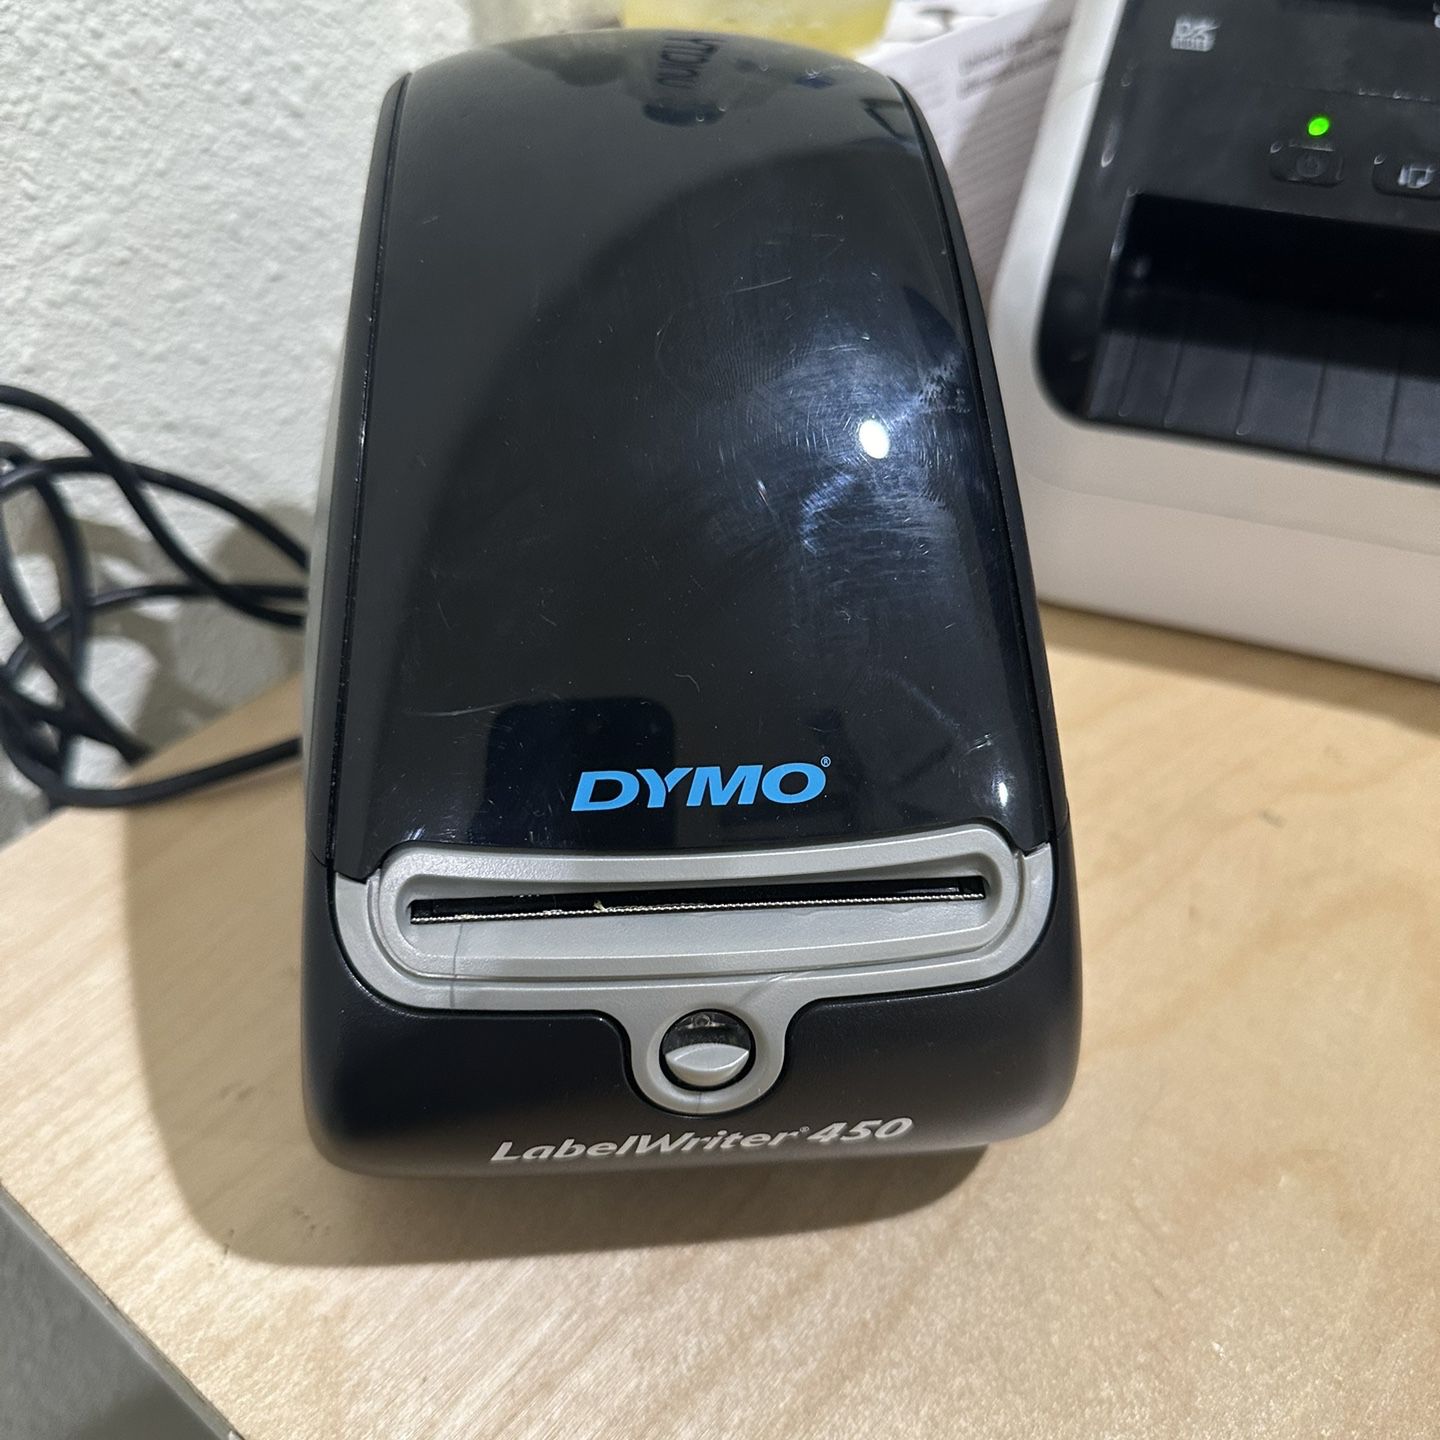 DYMO Label Printer | LabelWriter 450 Turbo Direct Thermal Label Printer, Fast Printing, Great for Labeling, Filing, Shipping, Mailing, Barcodes and Mo